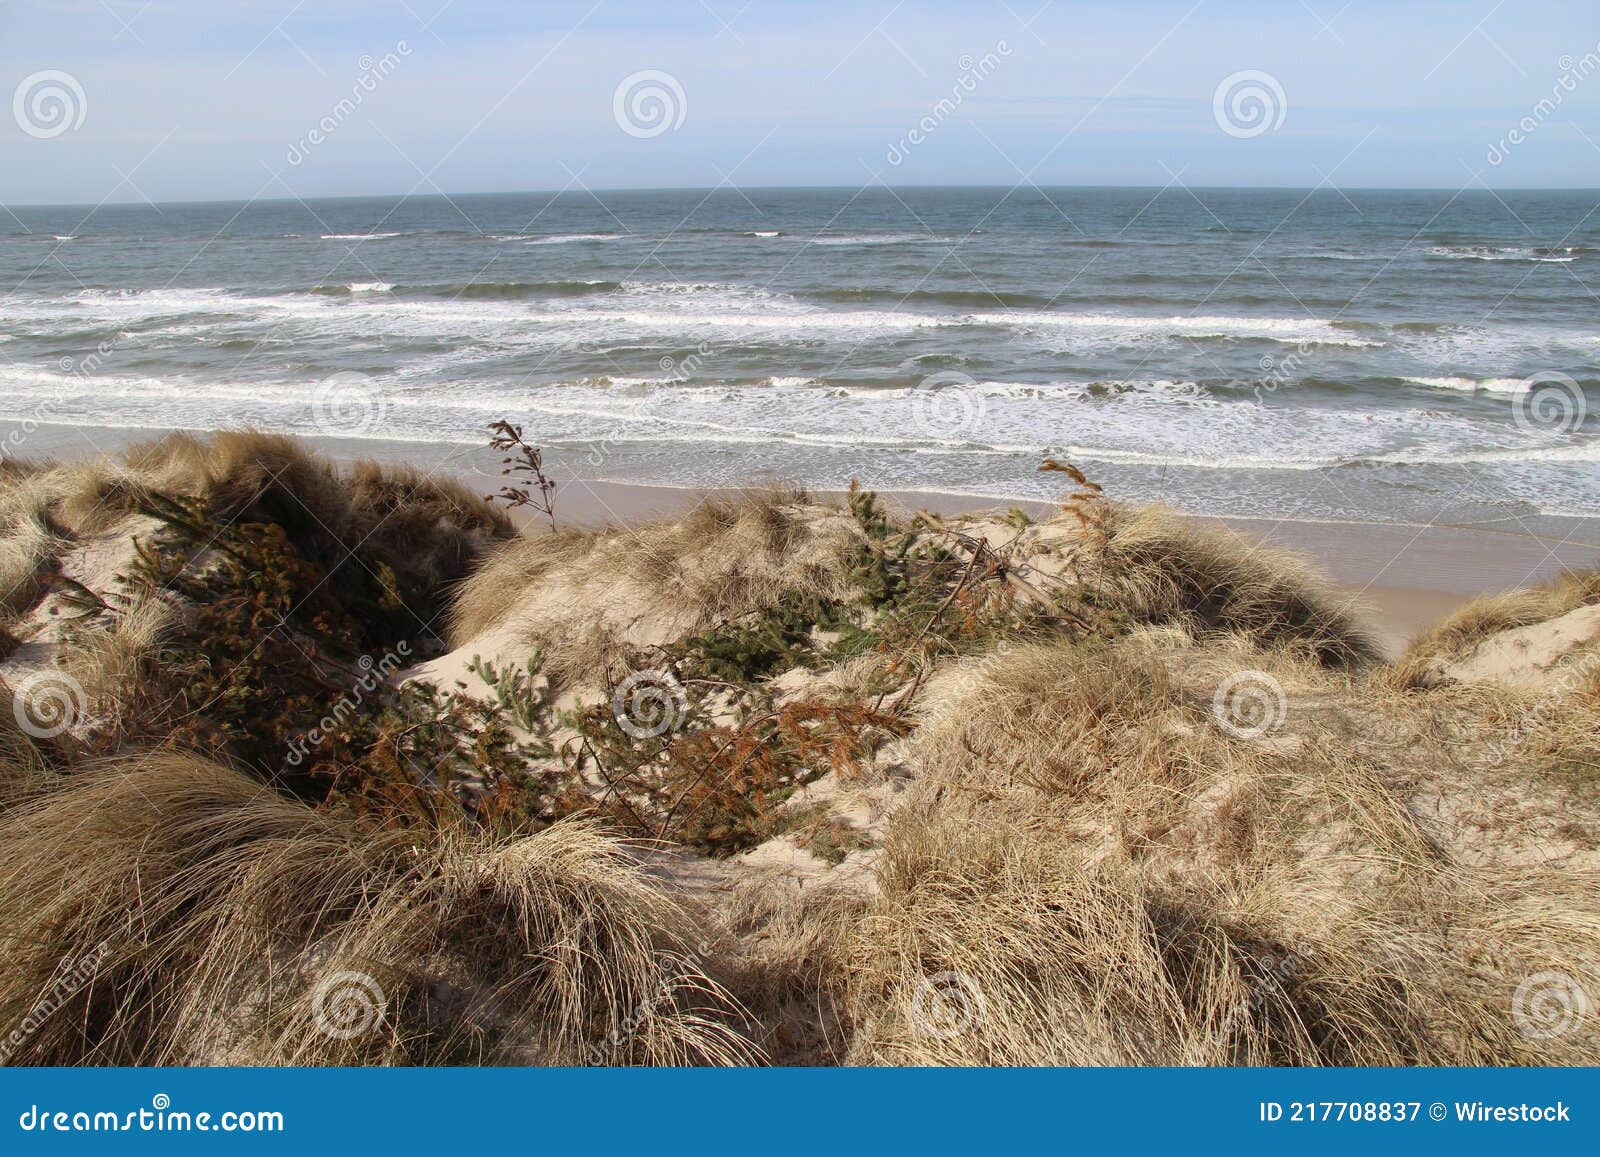 Beautiful View of Bushes and Dunes on Beach Near Furreby, North Jutland, Denmark Stock Image - Image of trees: 217708837